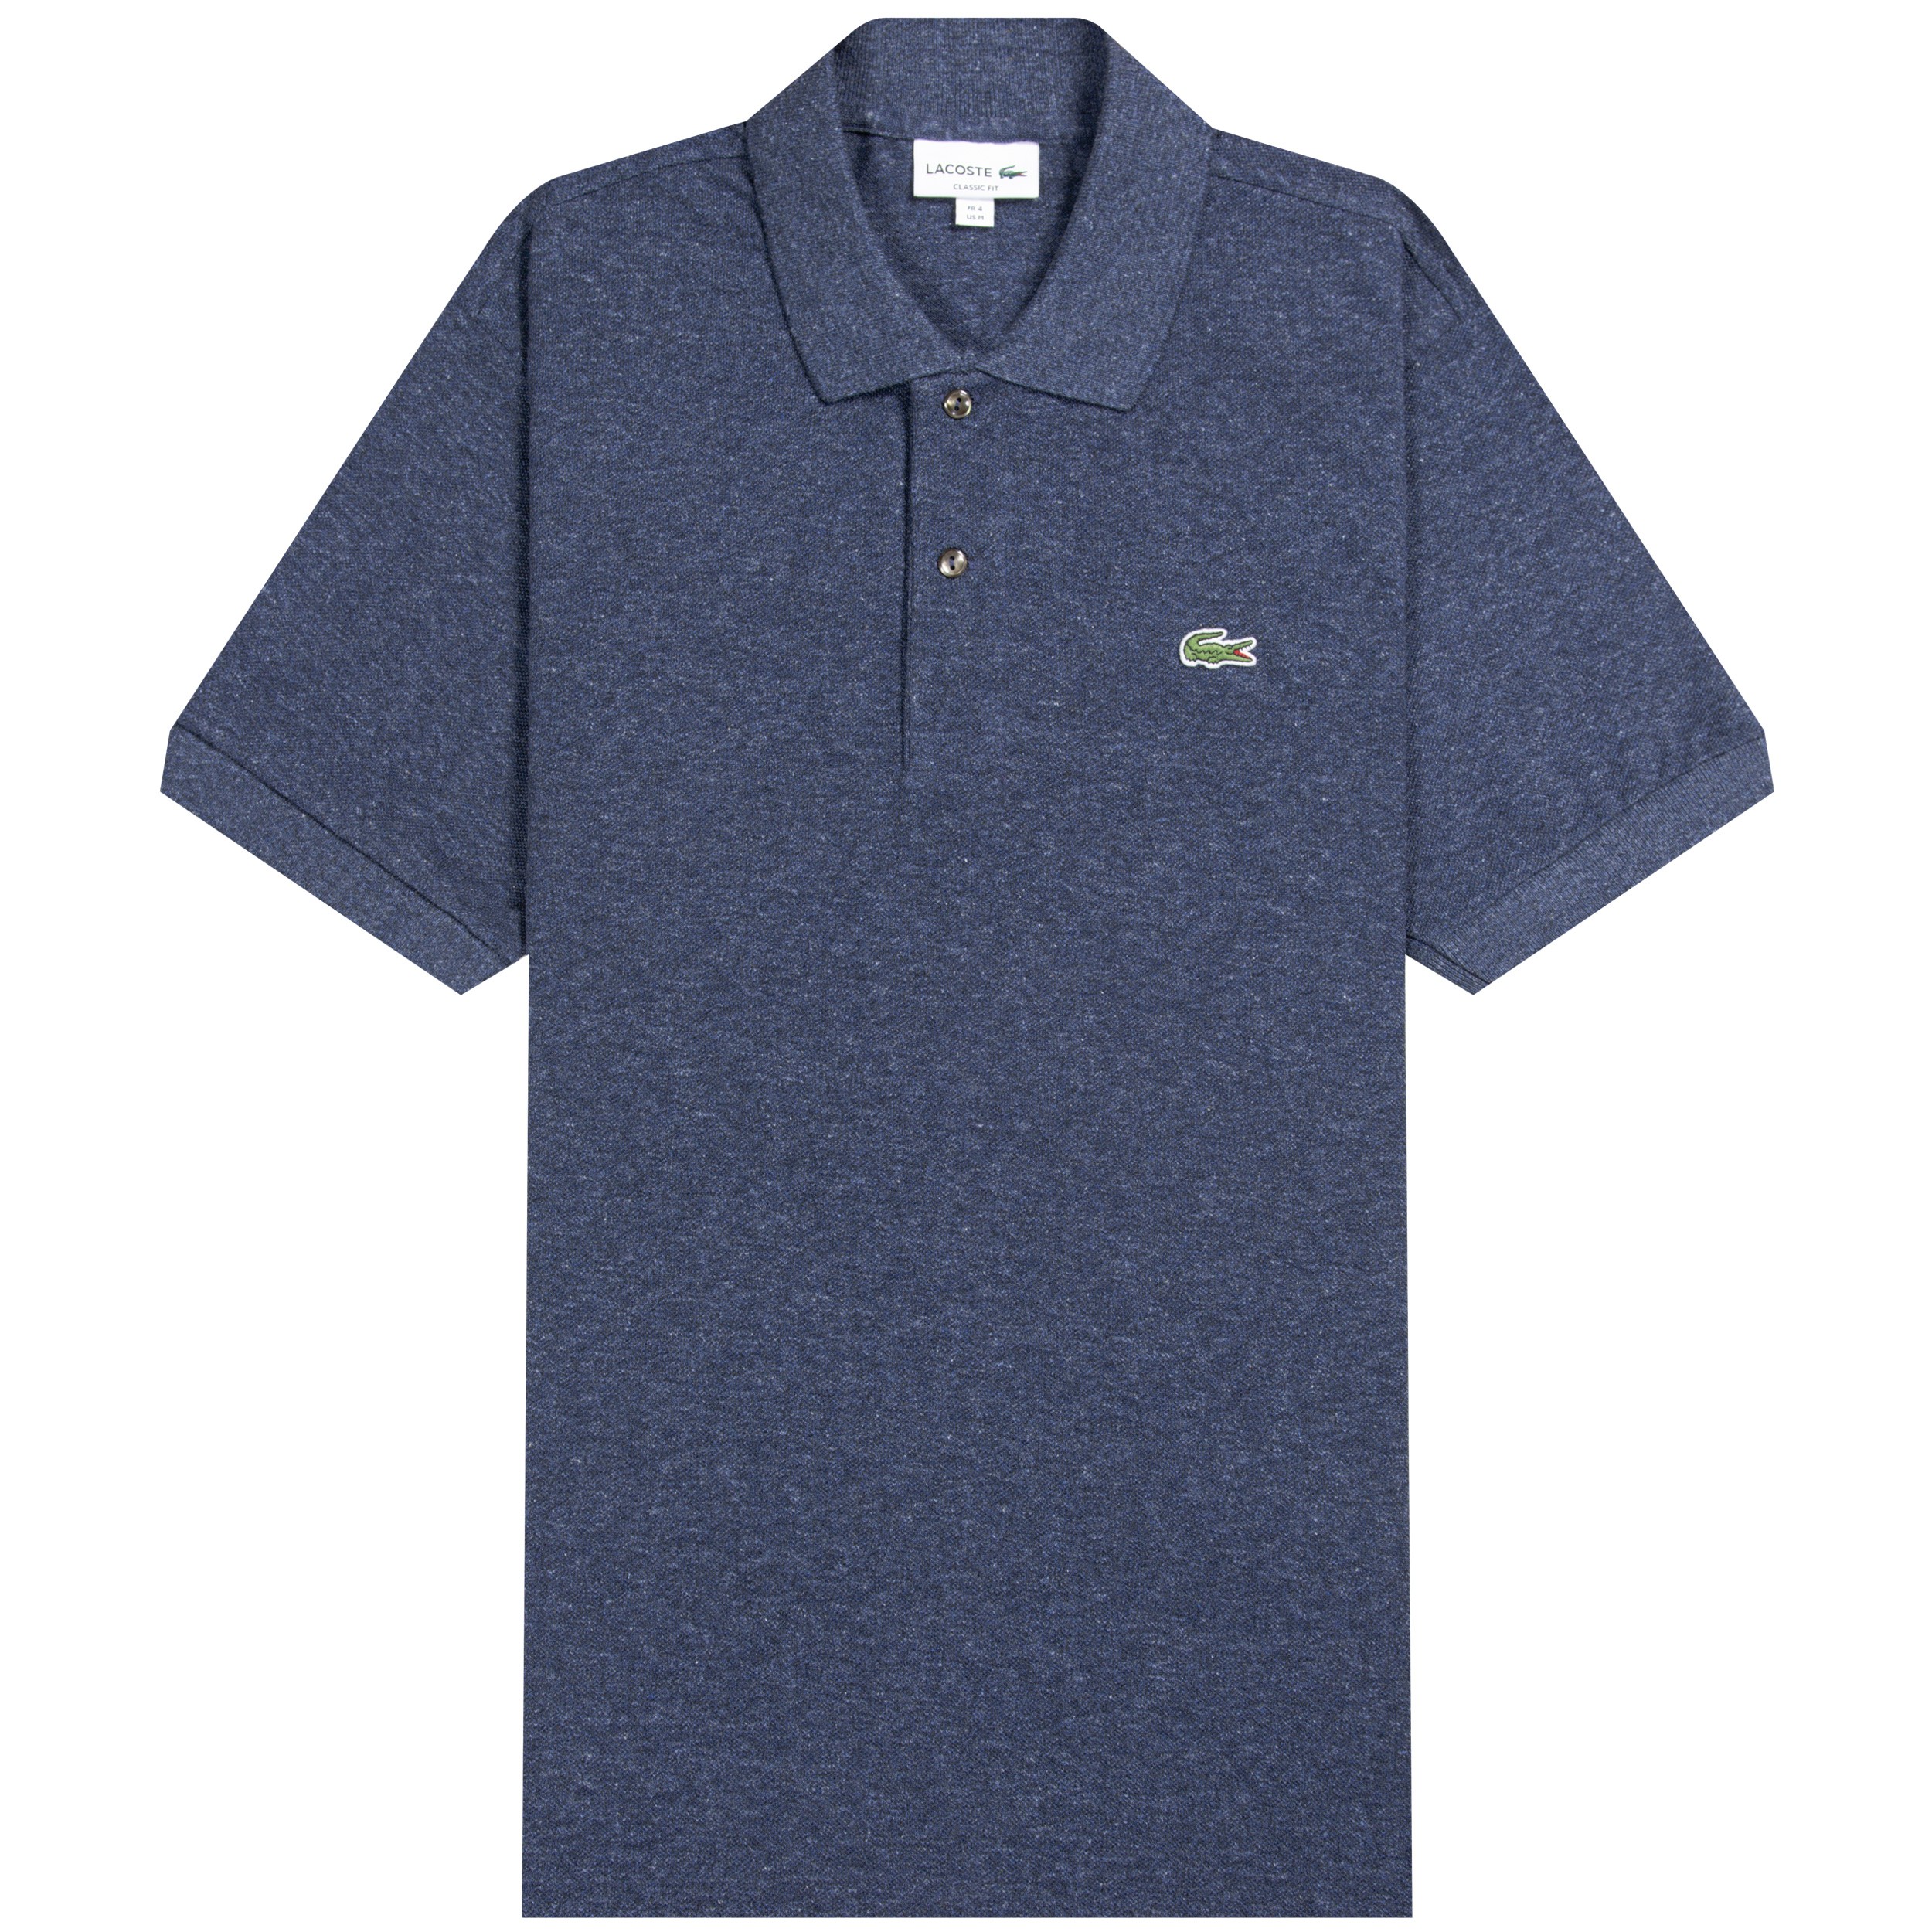 Lacoste Classic Polo Navy Heather